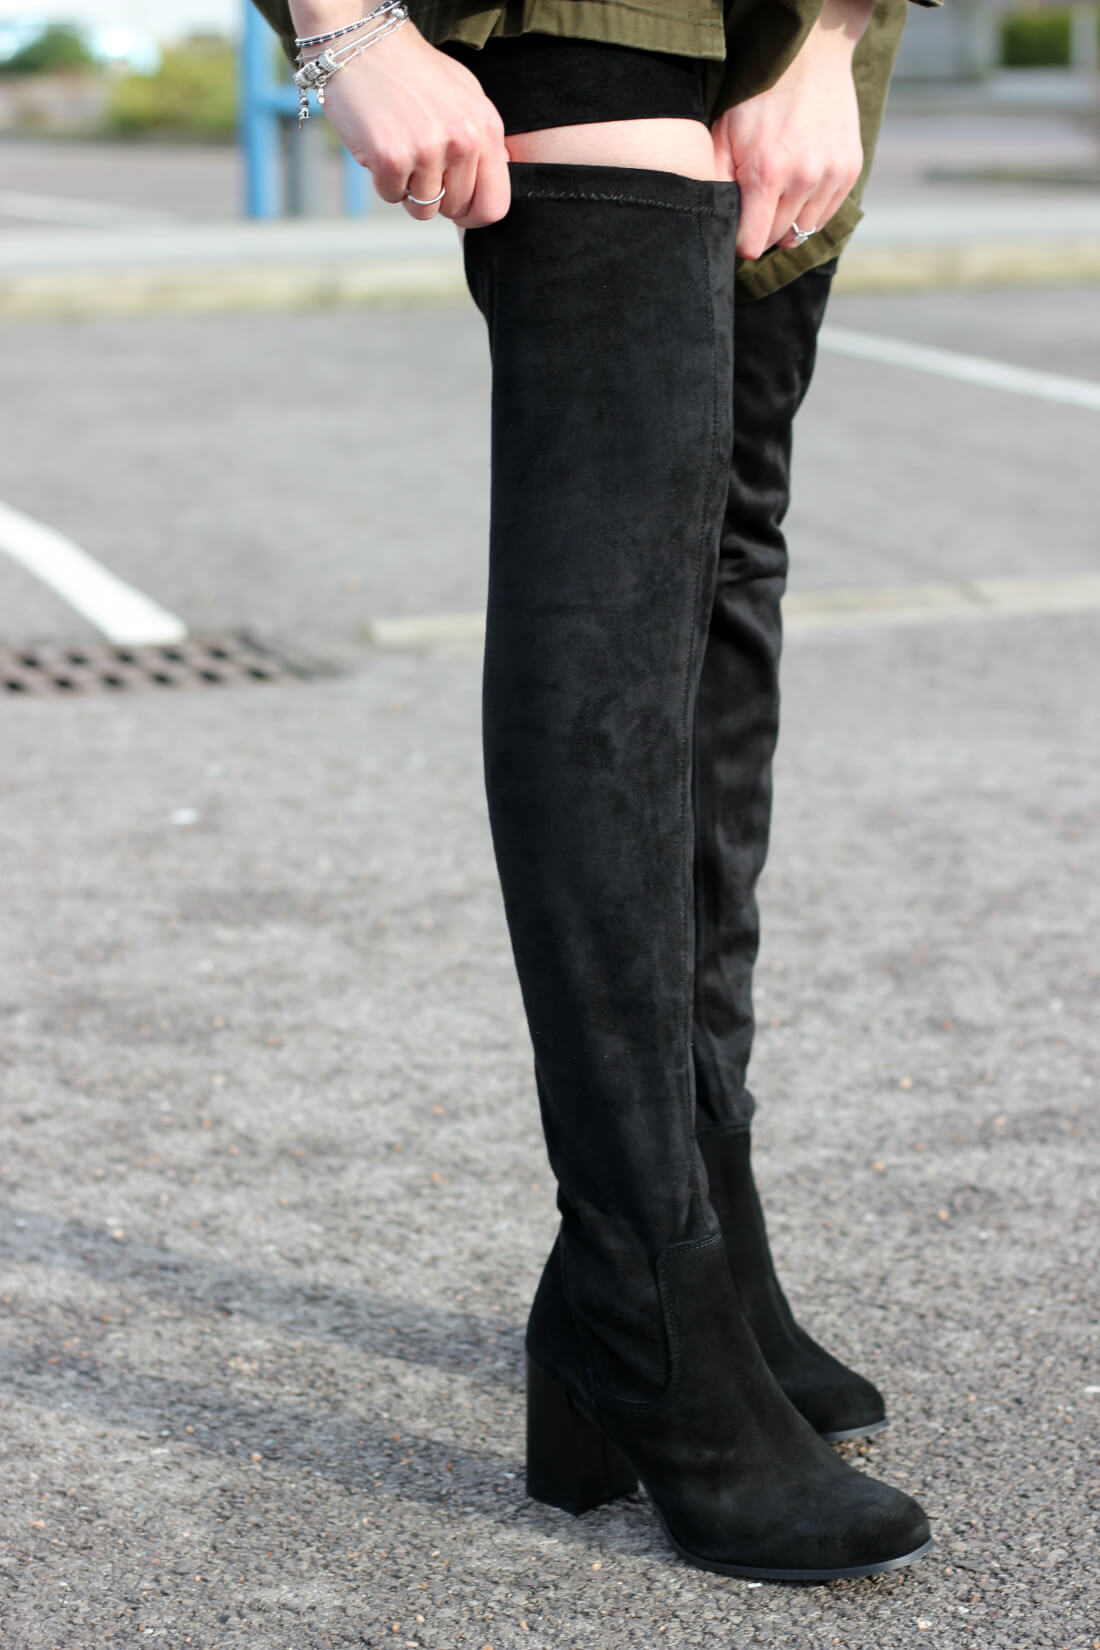 Style tips for wearing over the knee boots in the day